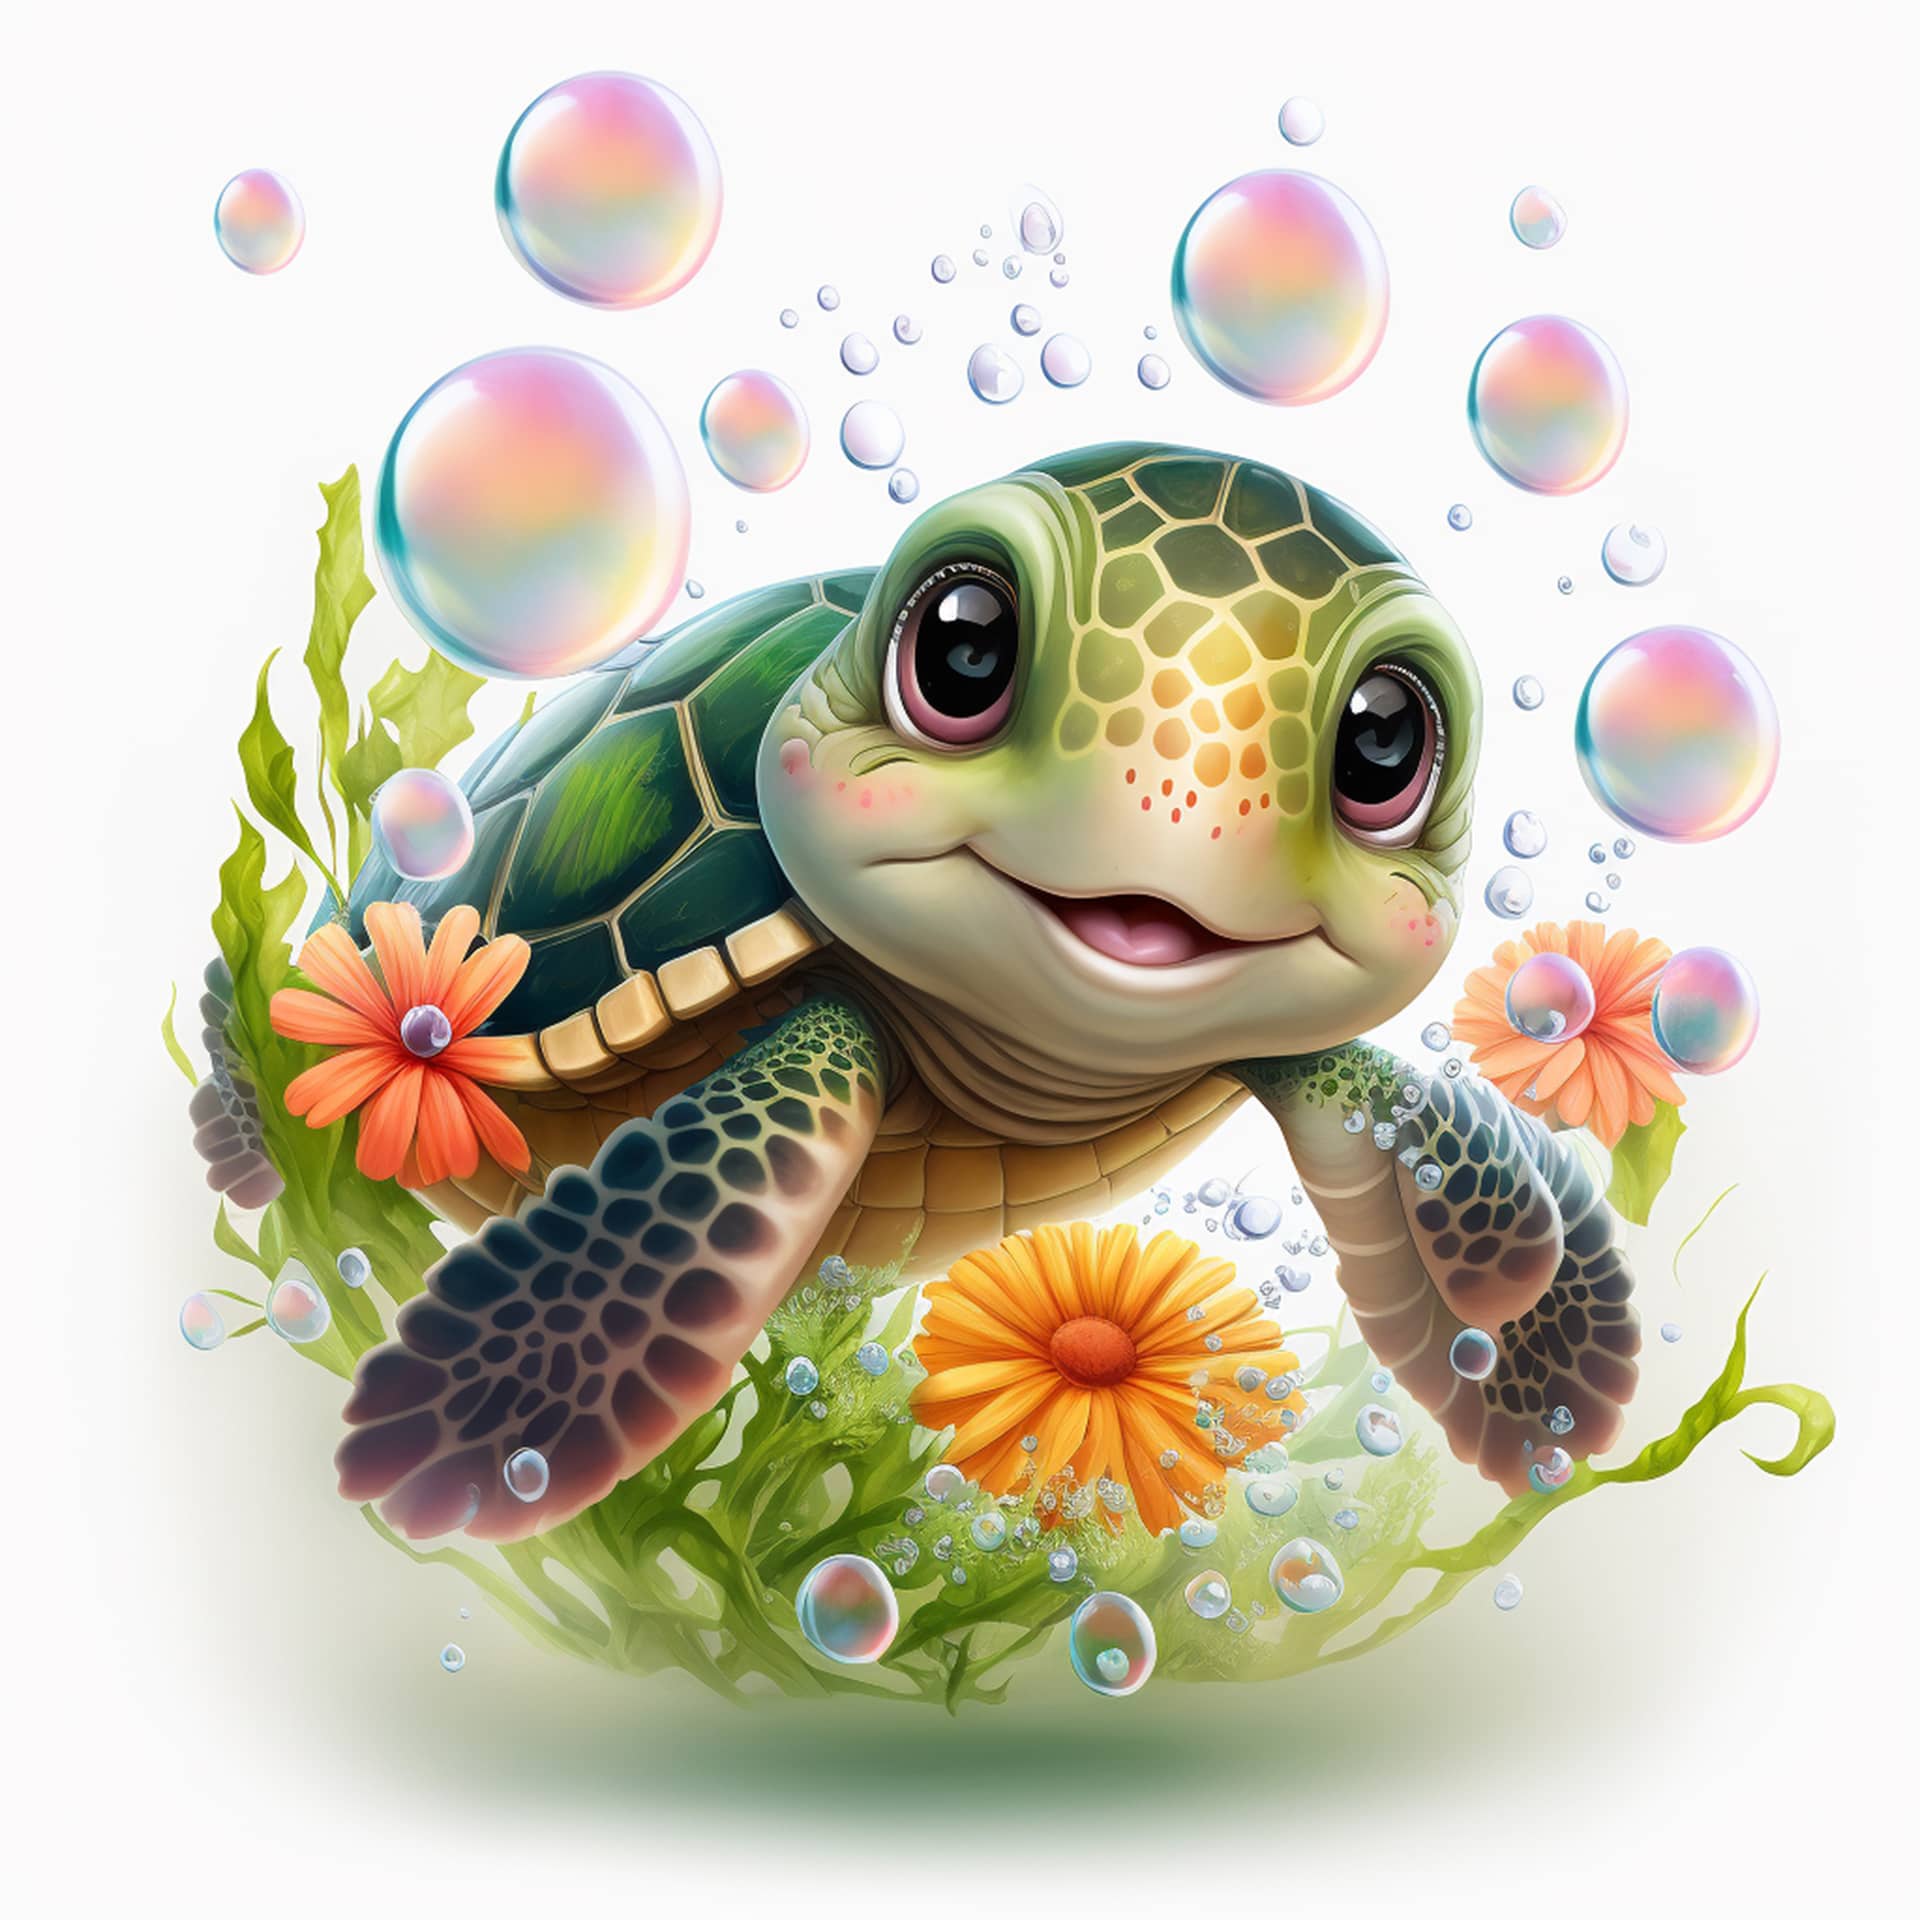 Sea turtle big eyes smiling friendly expression swimming water bubbles